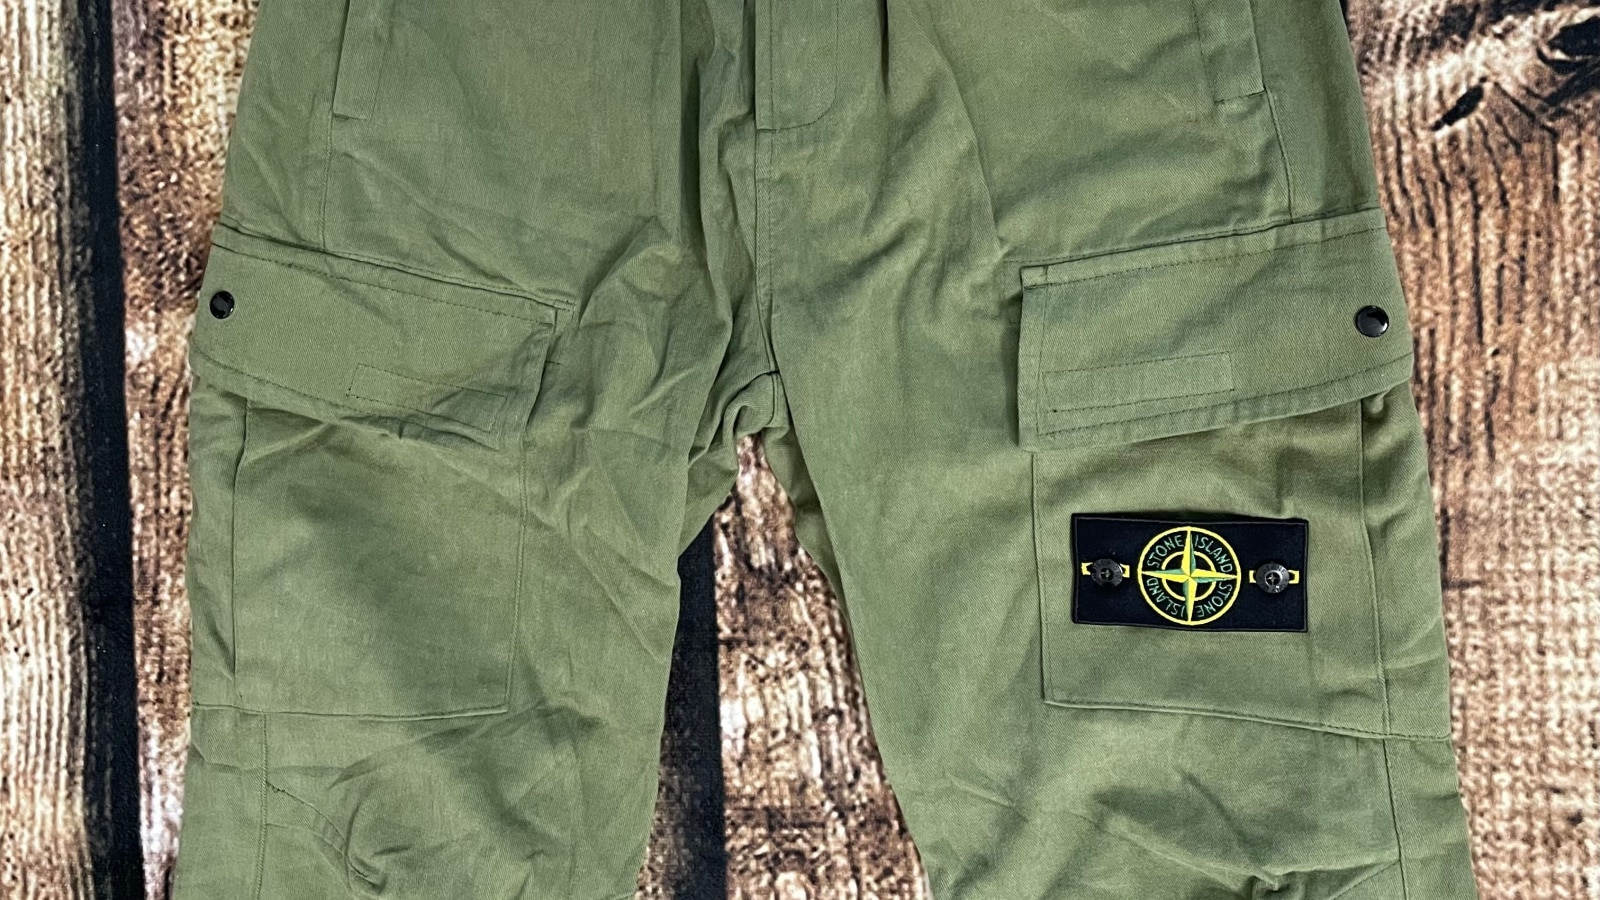 Seoul, South Korea - January 11th 2023 : Stone Island army green color cargo pant close up picture on wood patterned carpet